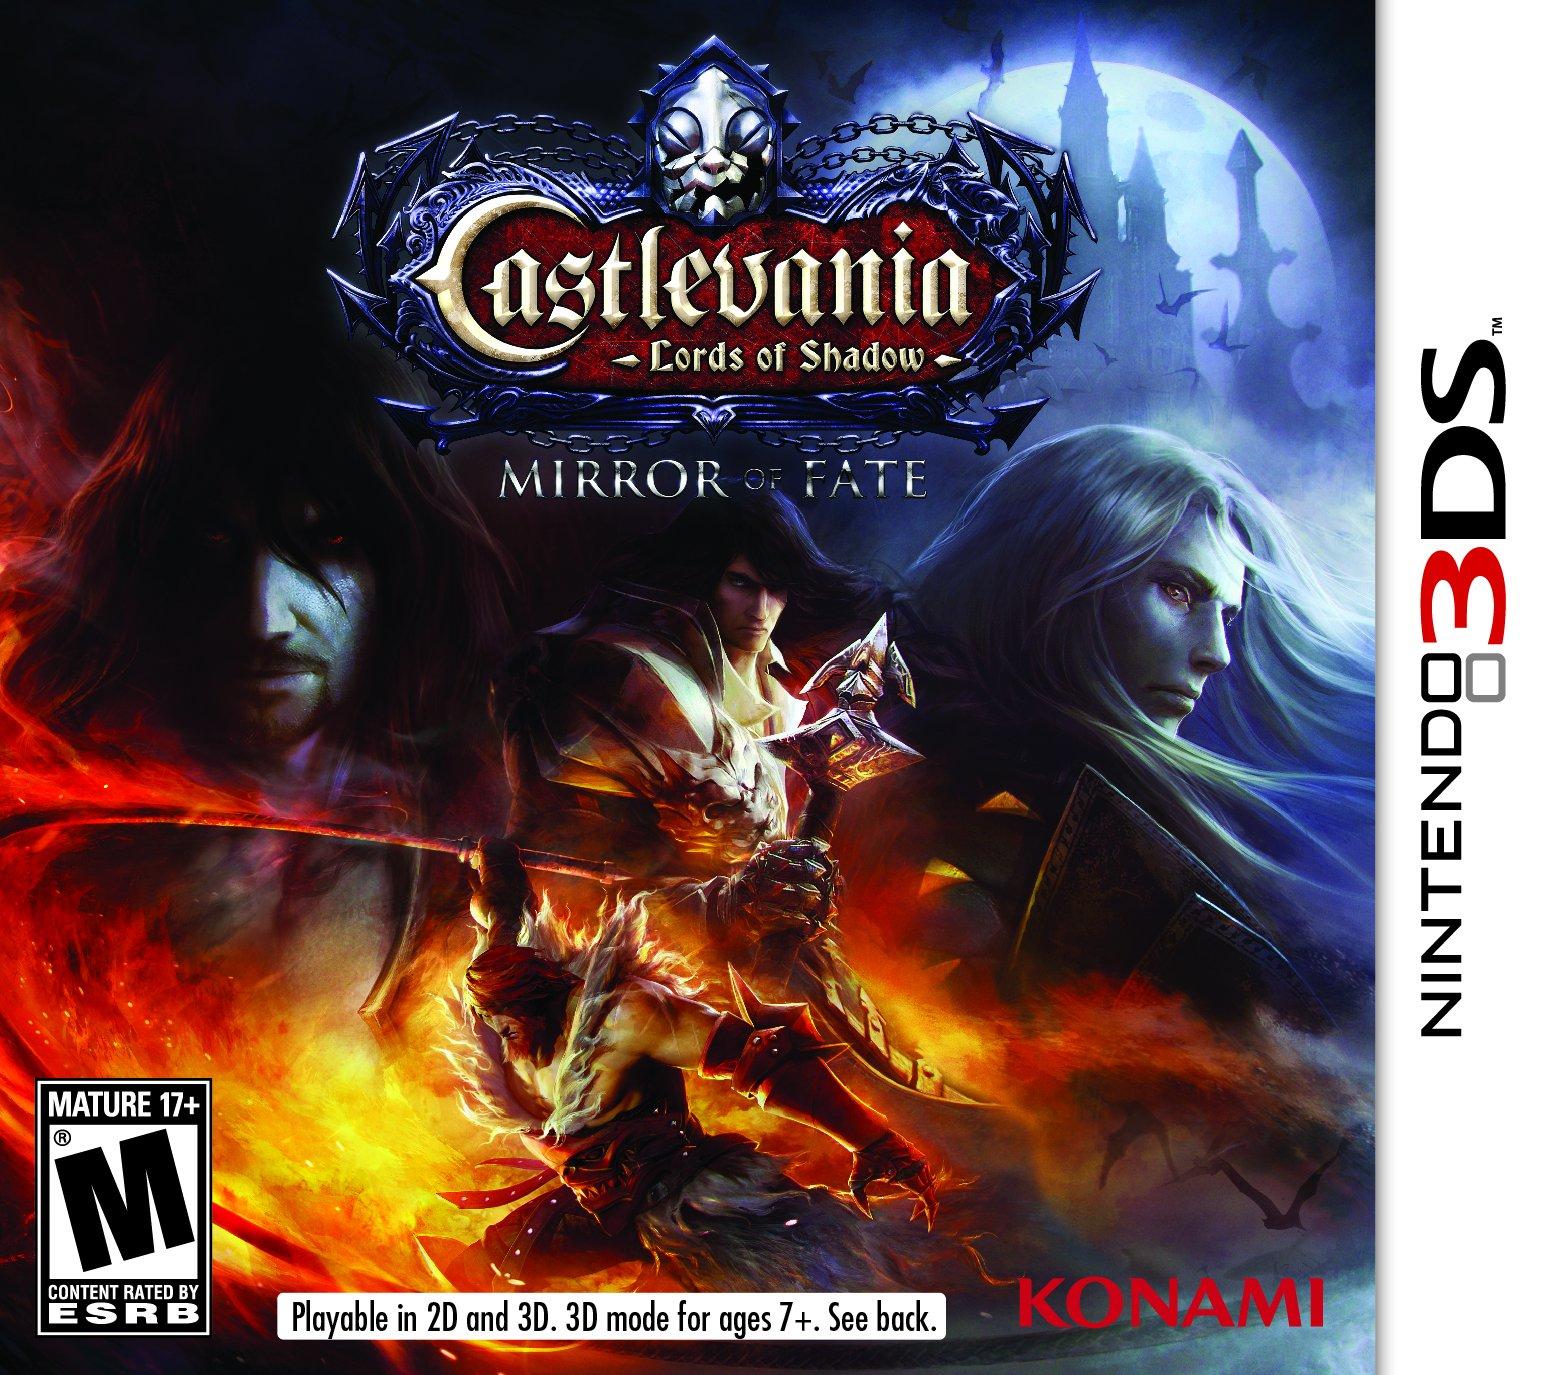  Castlevania: Lords of Shadow - Playstation 3 : Everything Else